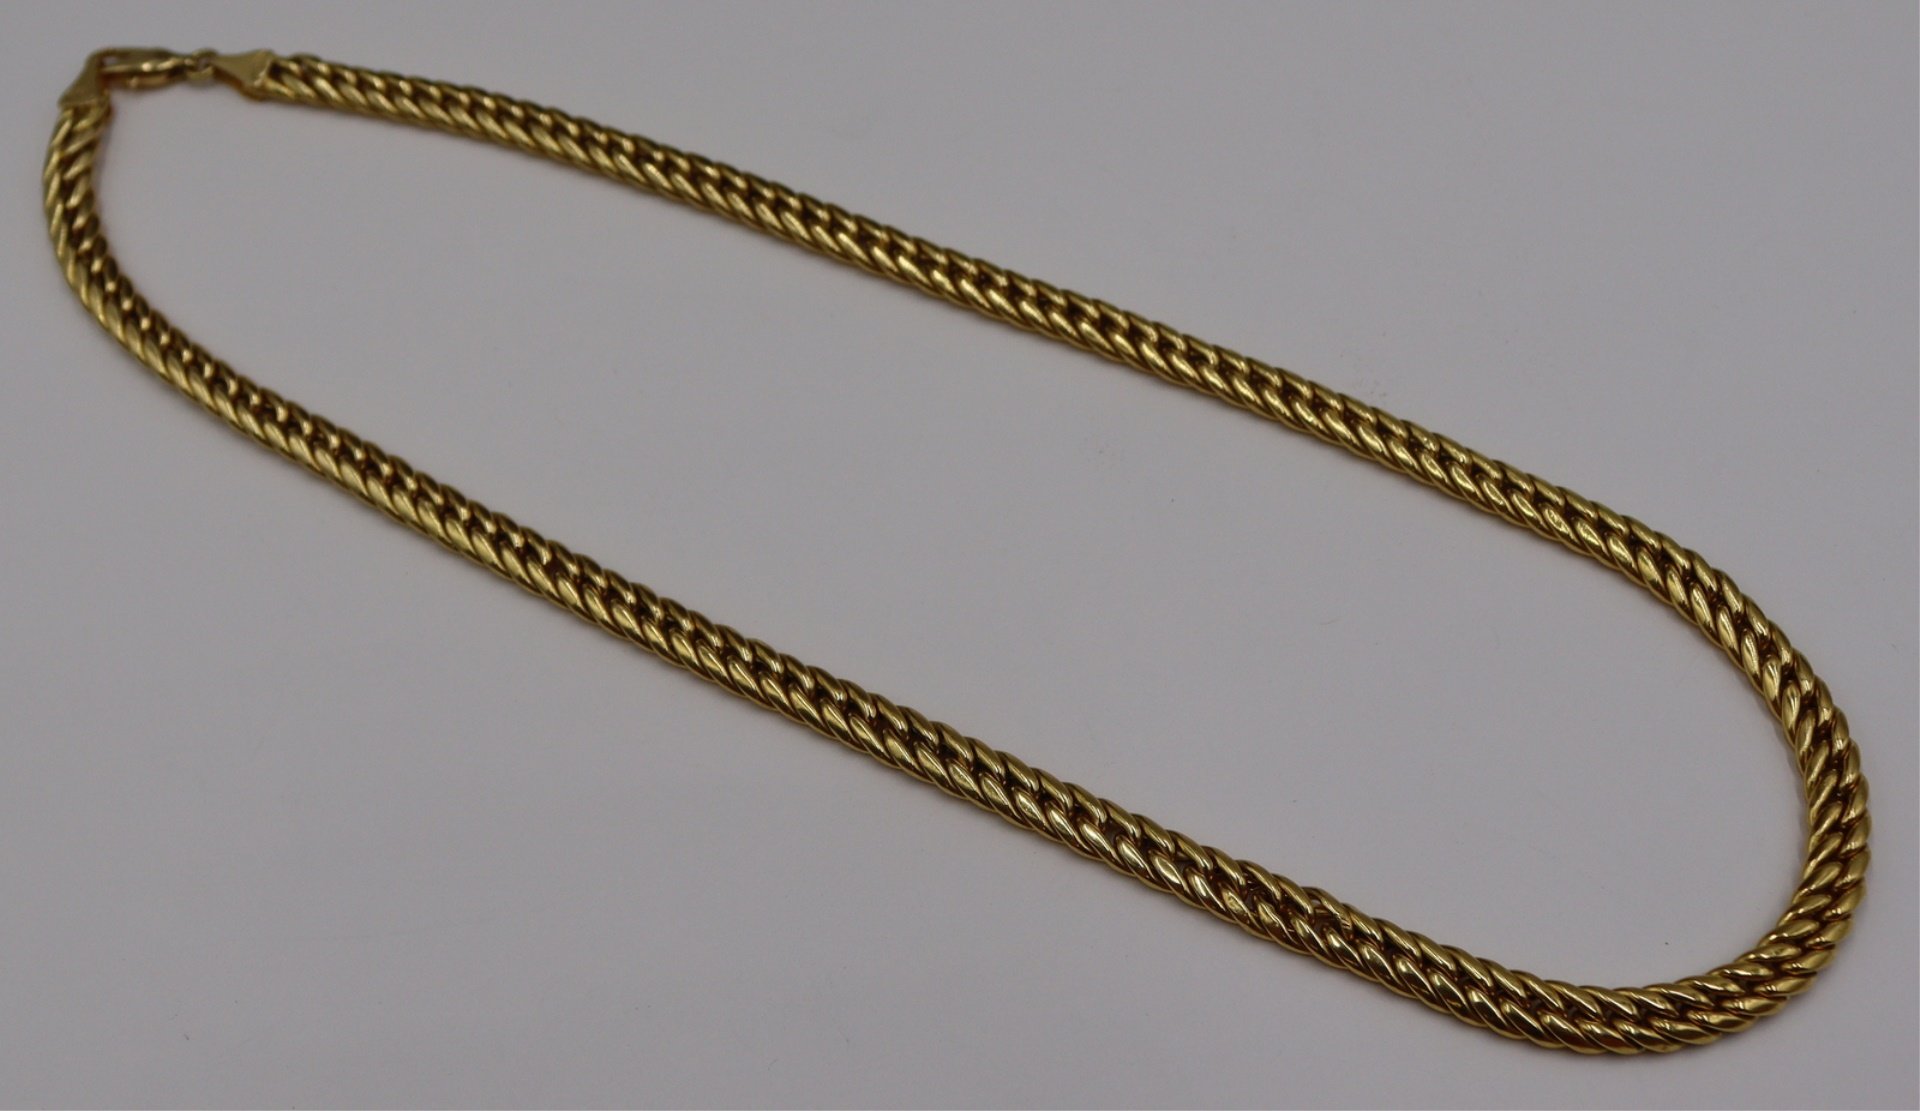 JEWELRY 18KT GOLD CURB LINK CHAIN 3bc518